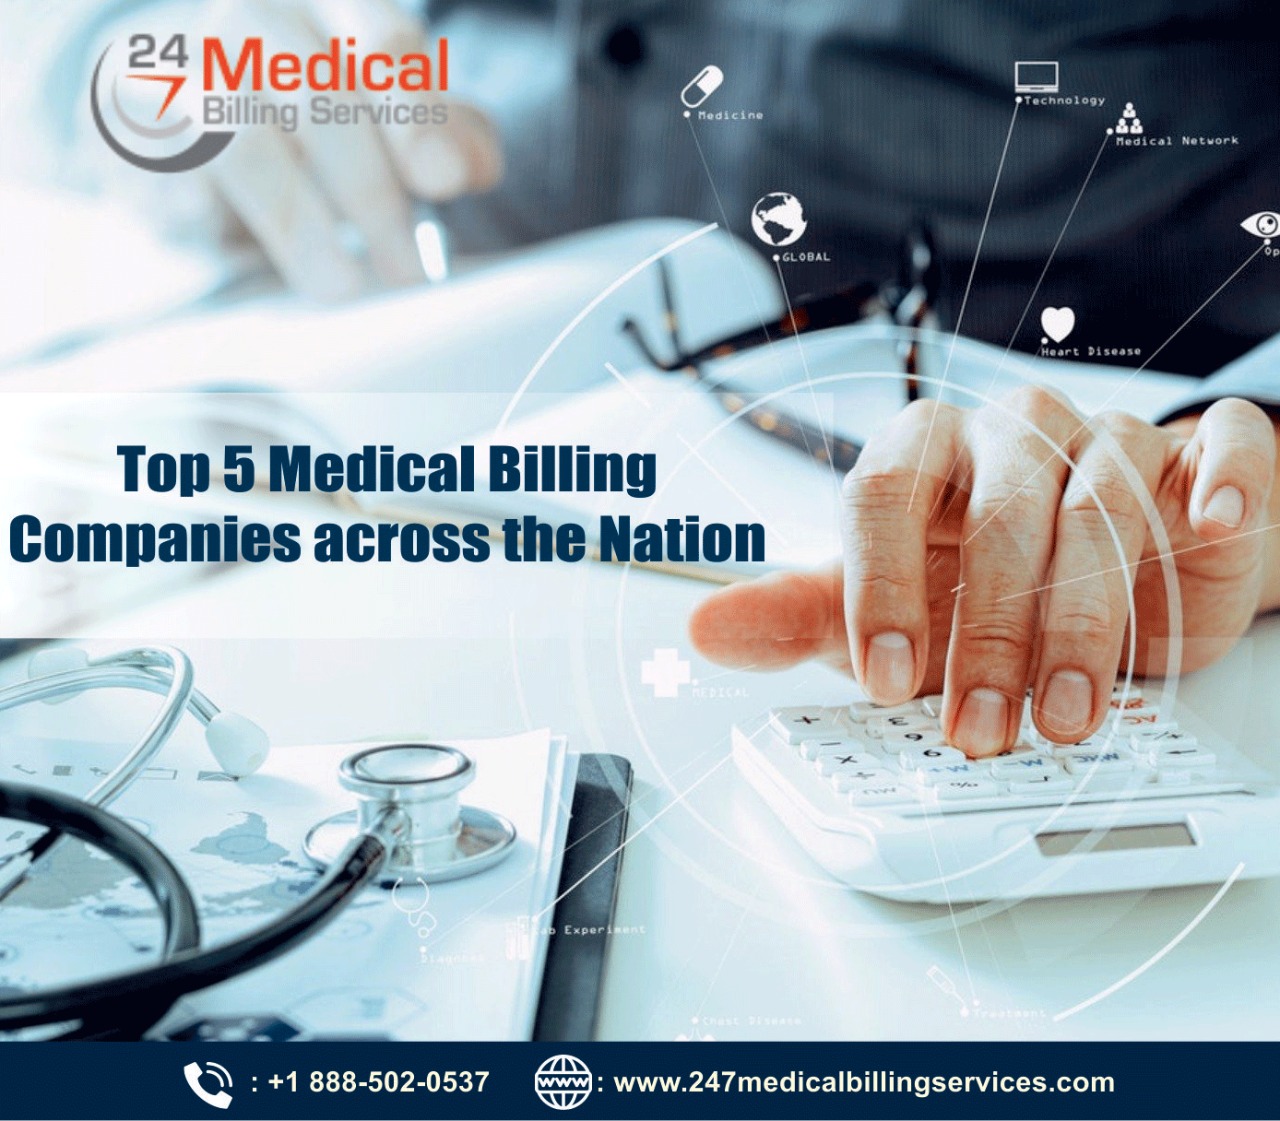  Top 5 Medical Billing Companies across the Nation